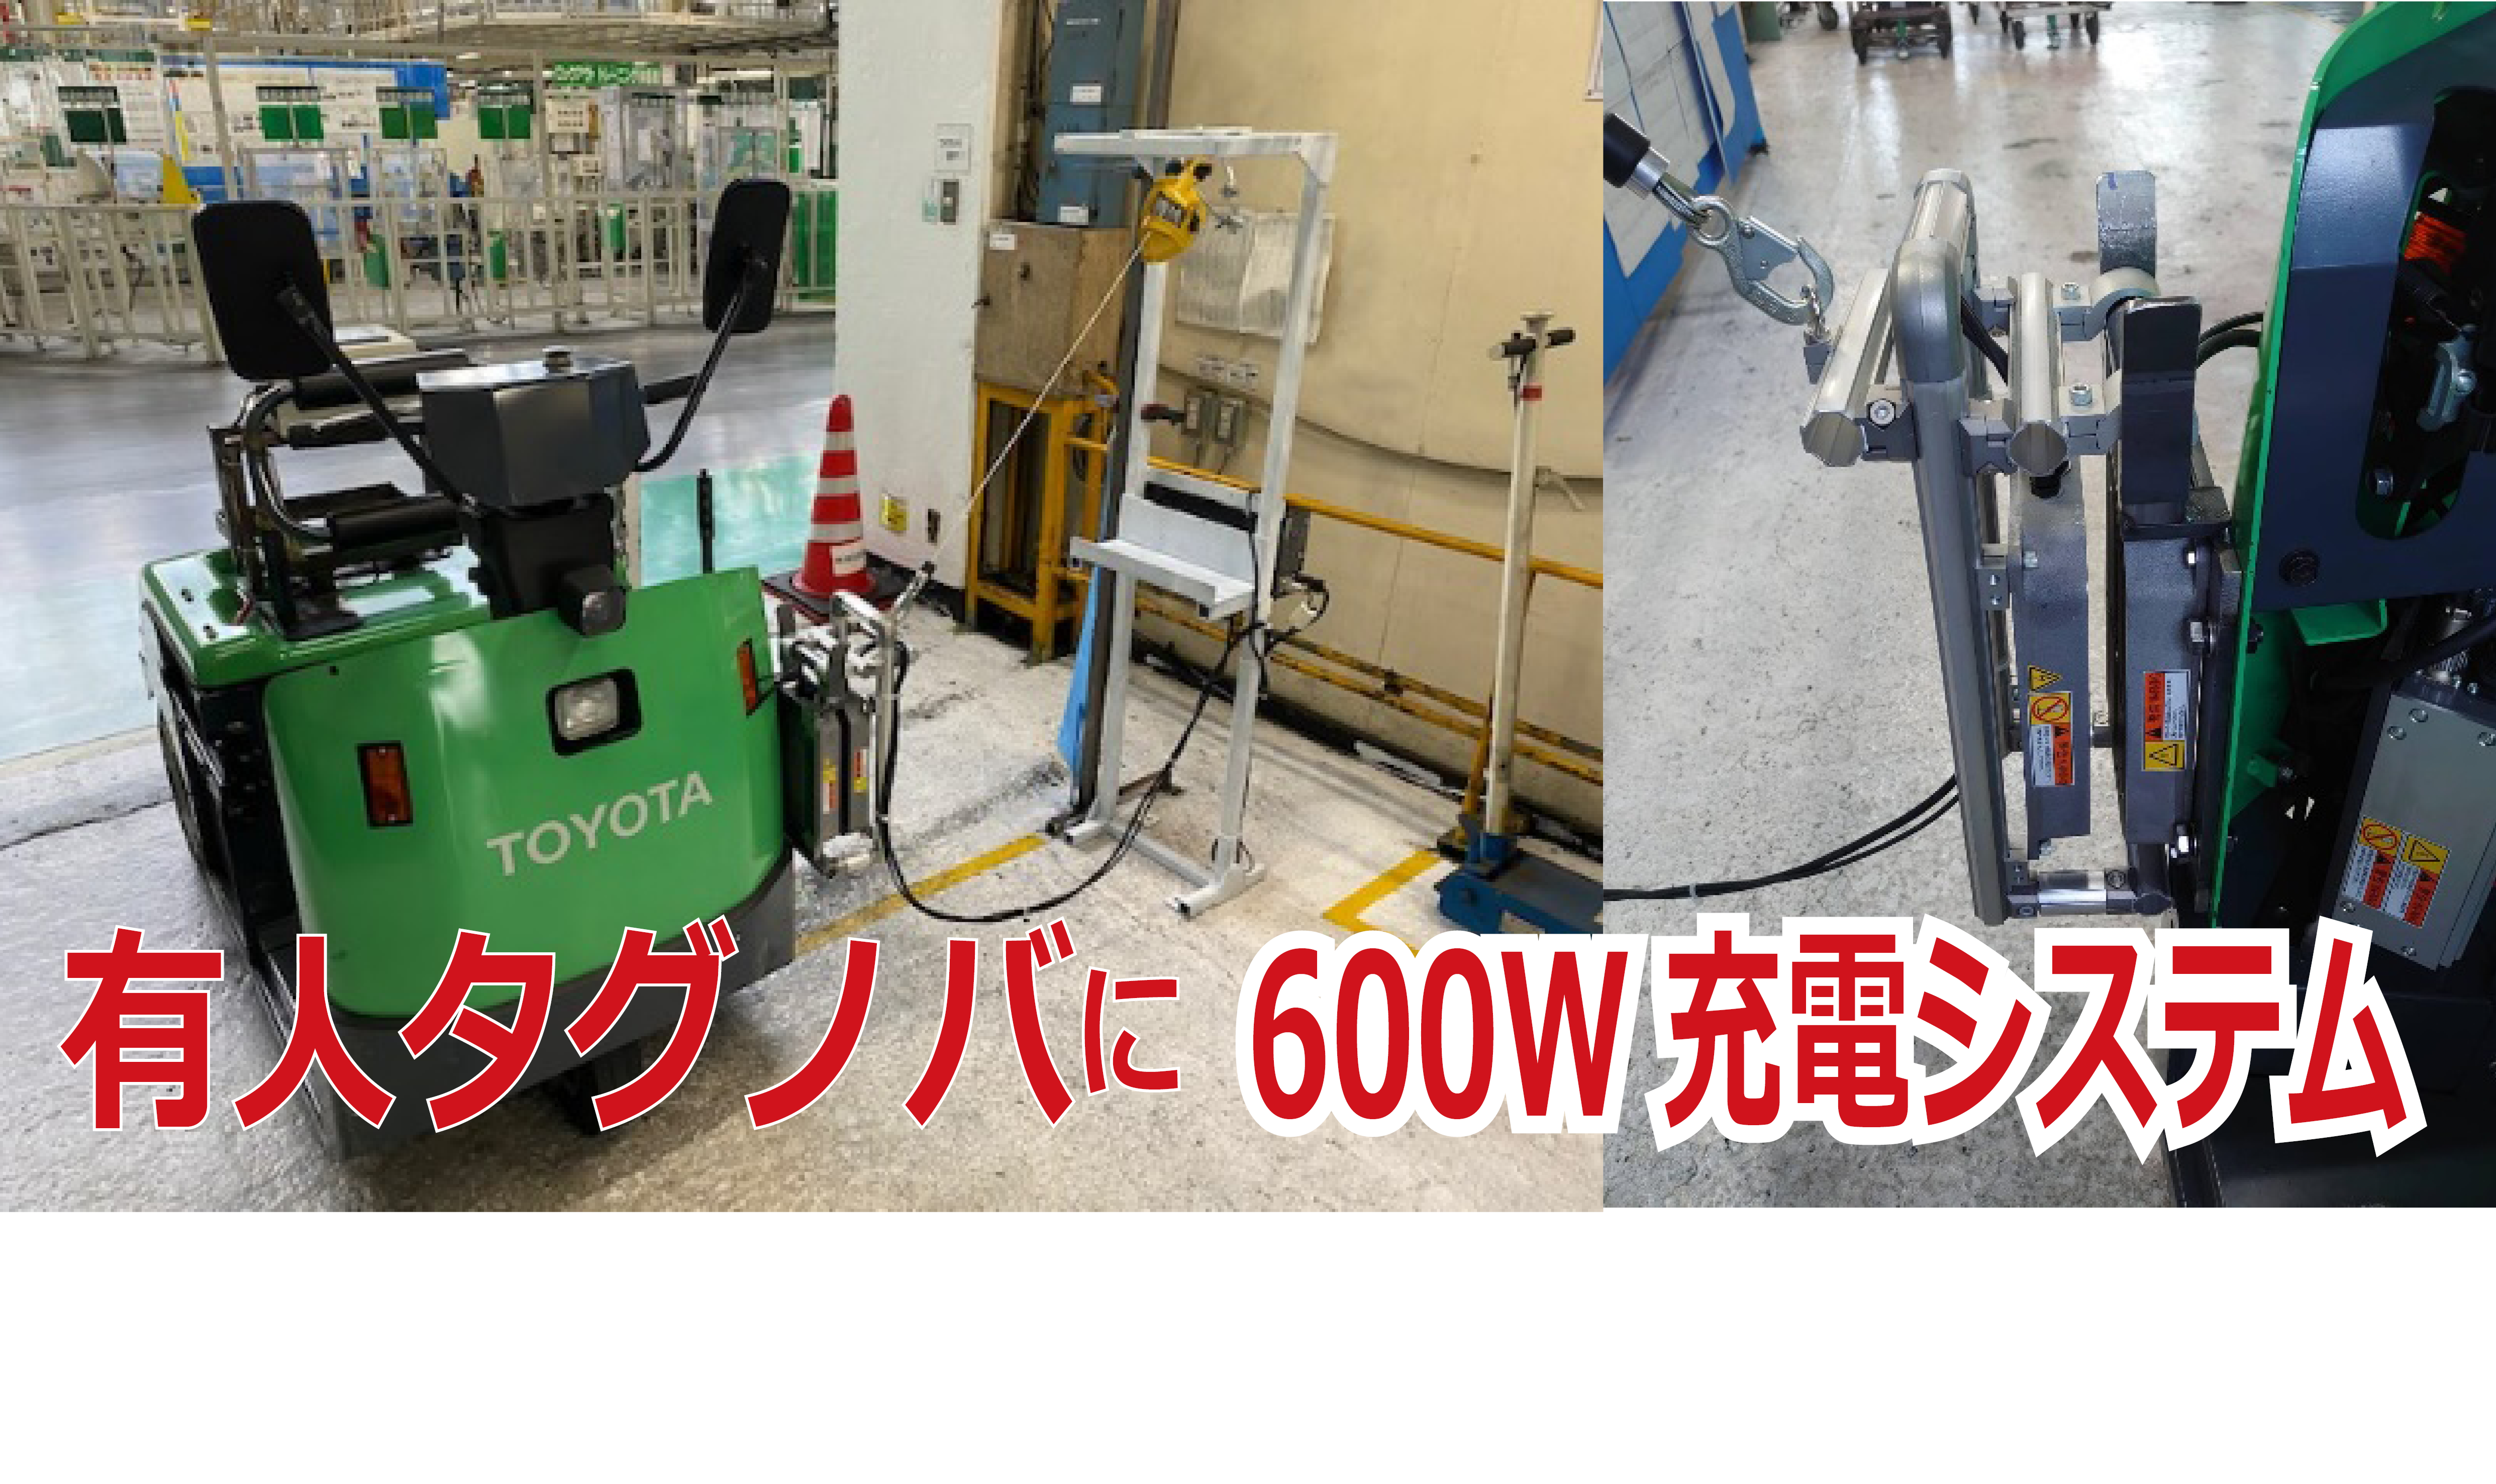 [Introduction example] 600W wireless charging system has been adopted for the manned Tagnova of Toyota Auto Body Co., Ltd.